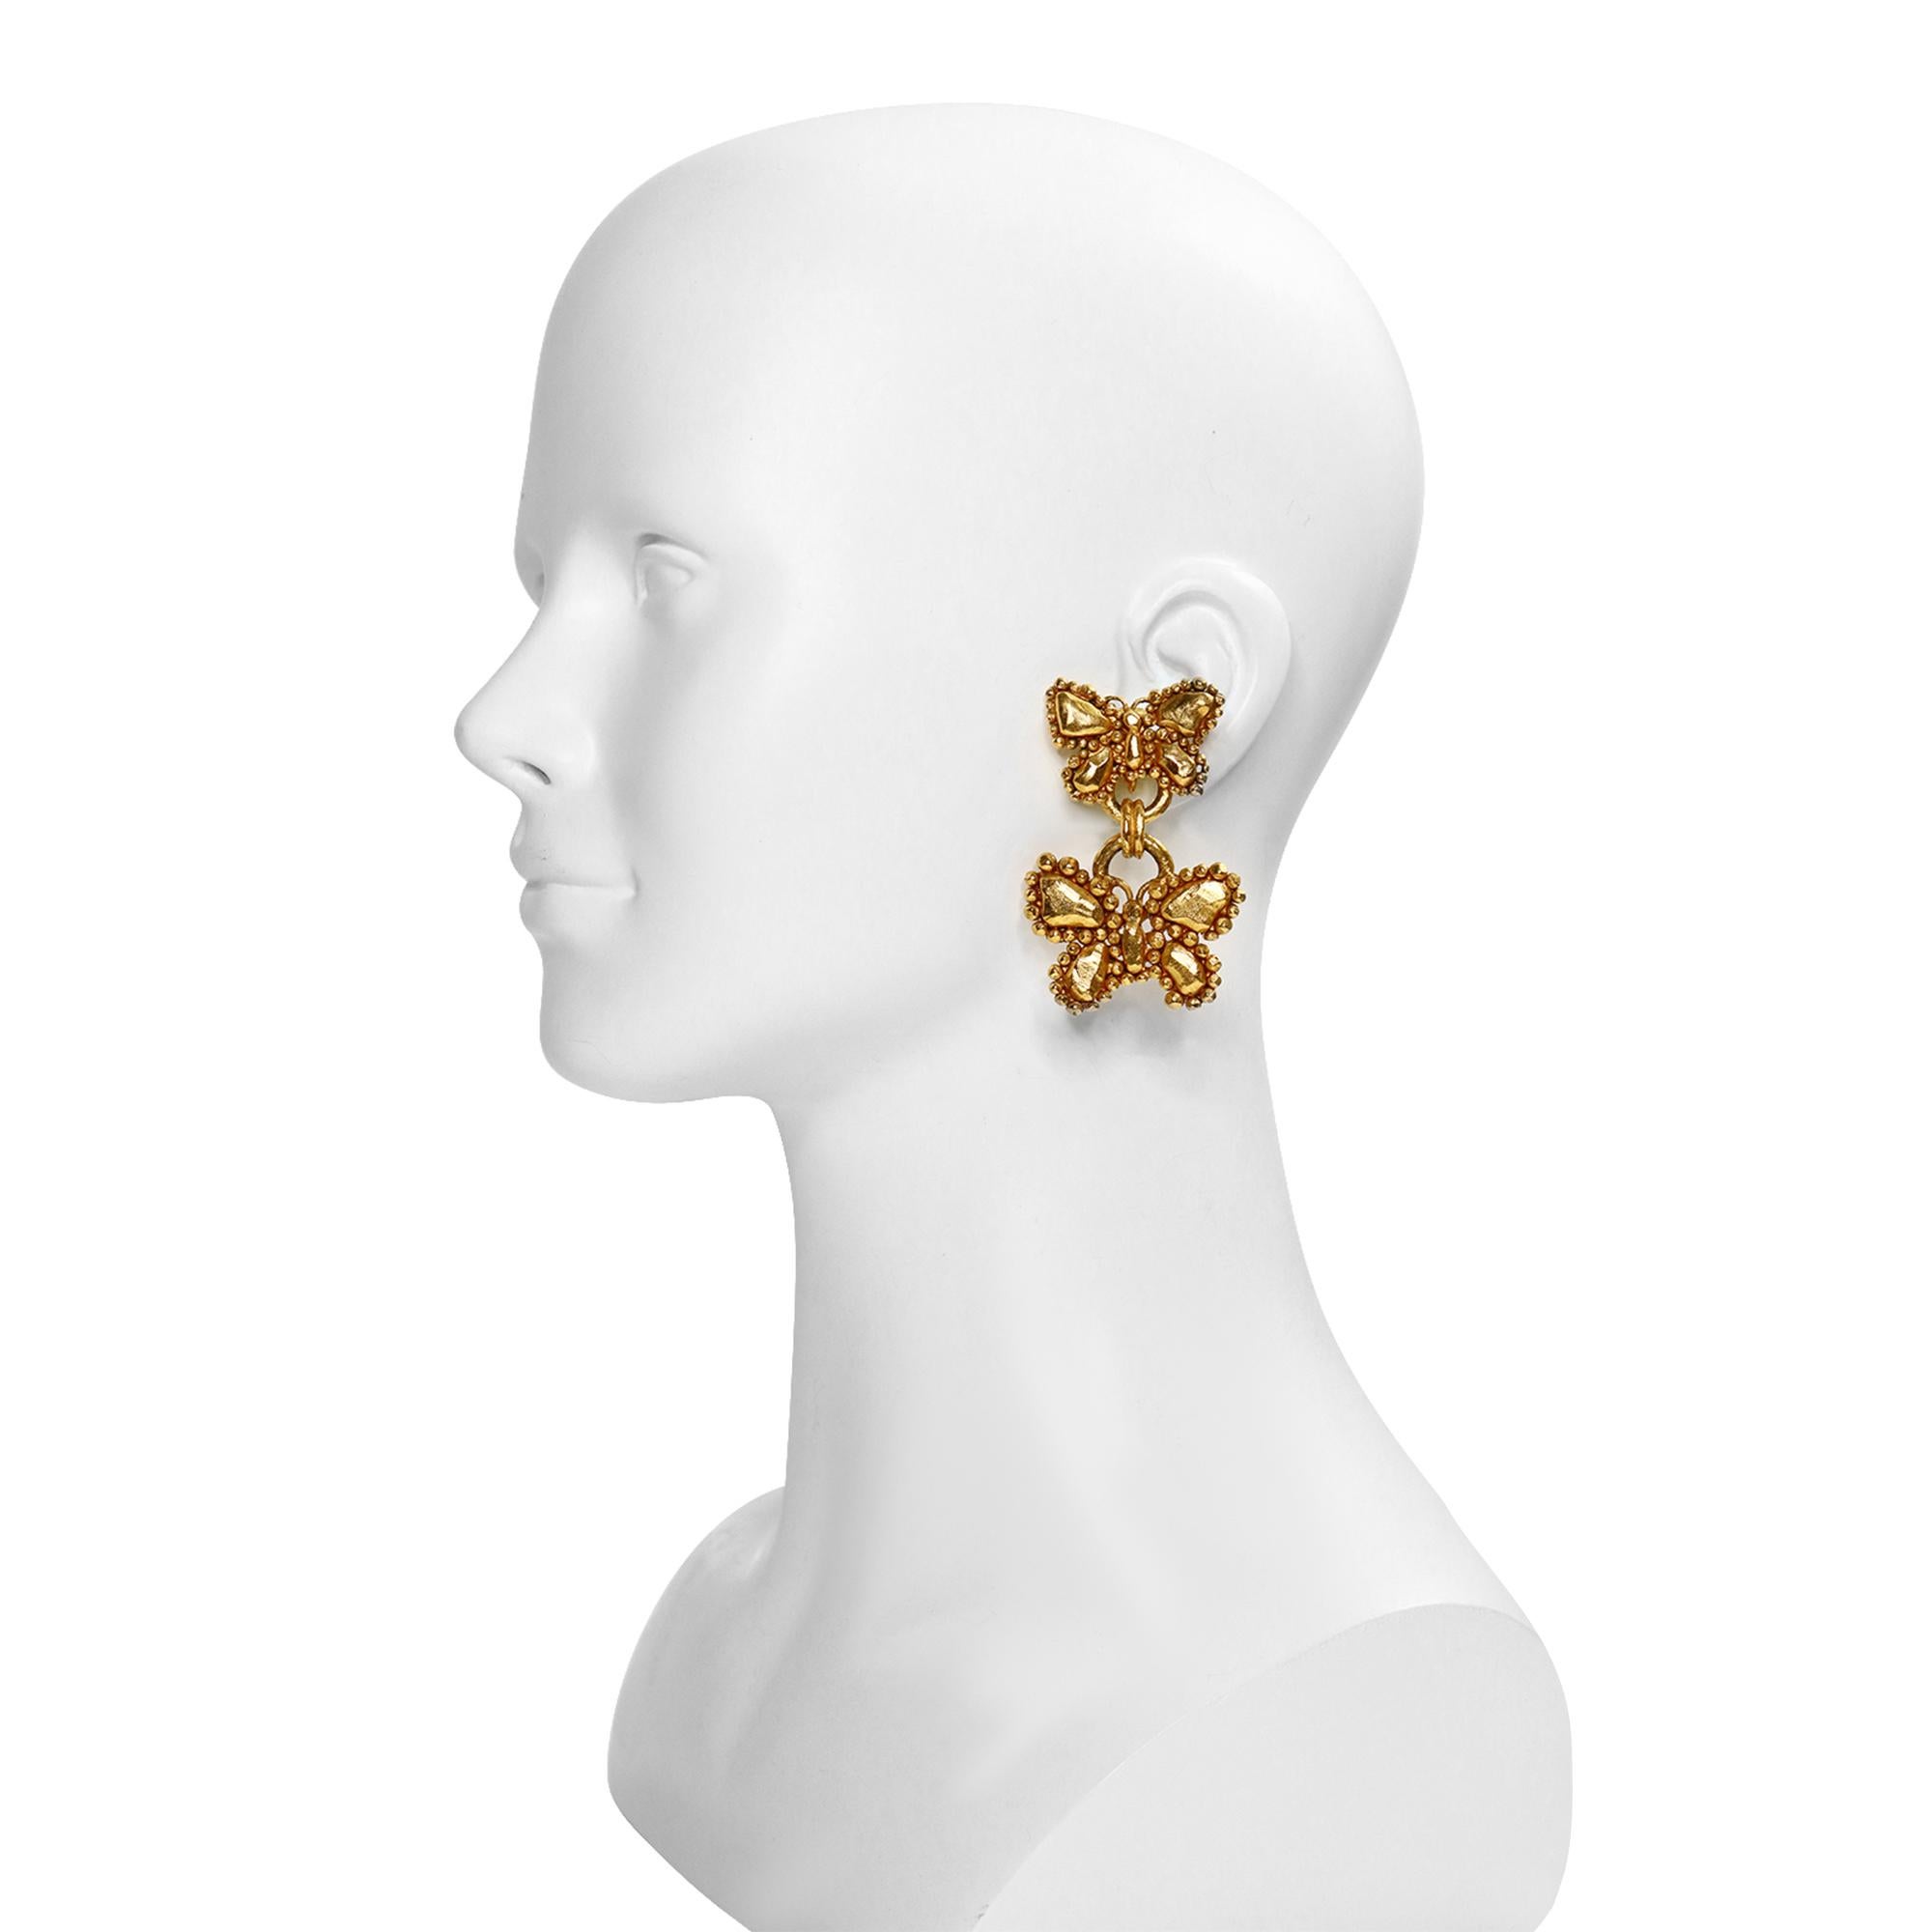 Vintage Ungaro Gold Dangling Butterfly Earrings Circa 1980s. These are double earings of a smaller and then larger butterfly.  They are so chic and will make any outfit look put together and chic. Clip on. 

They really don't make costume jewelry